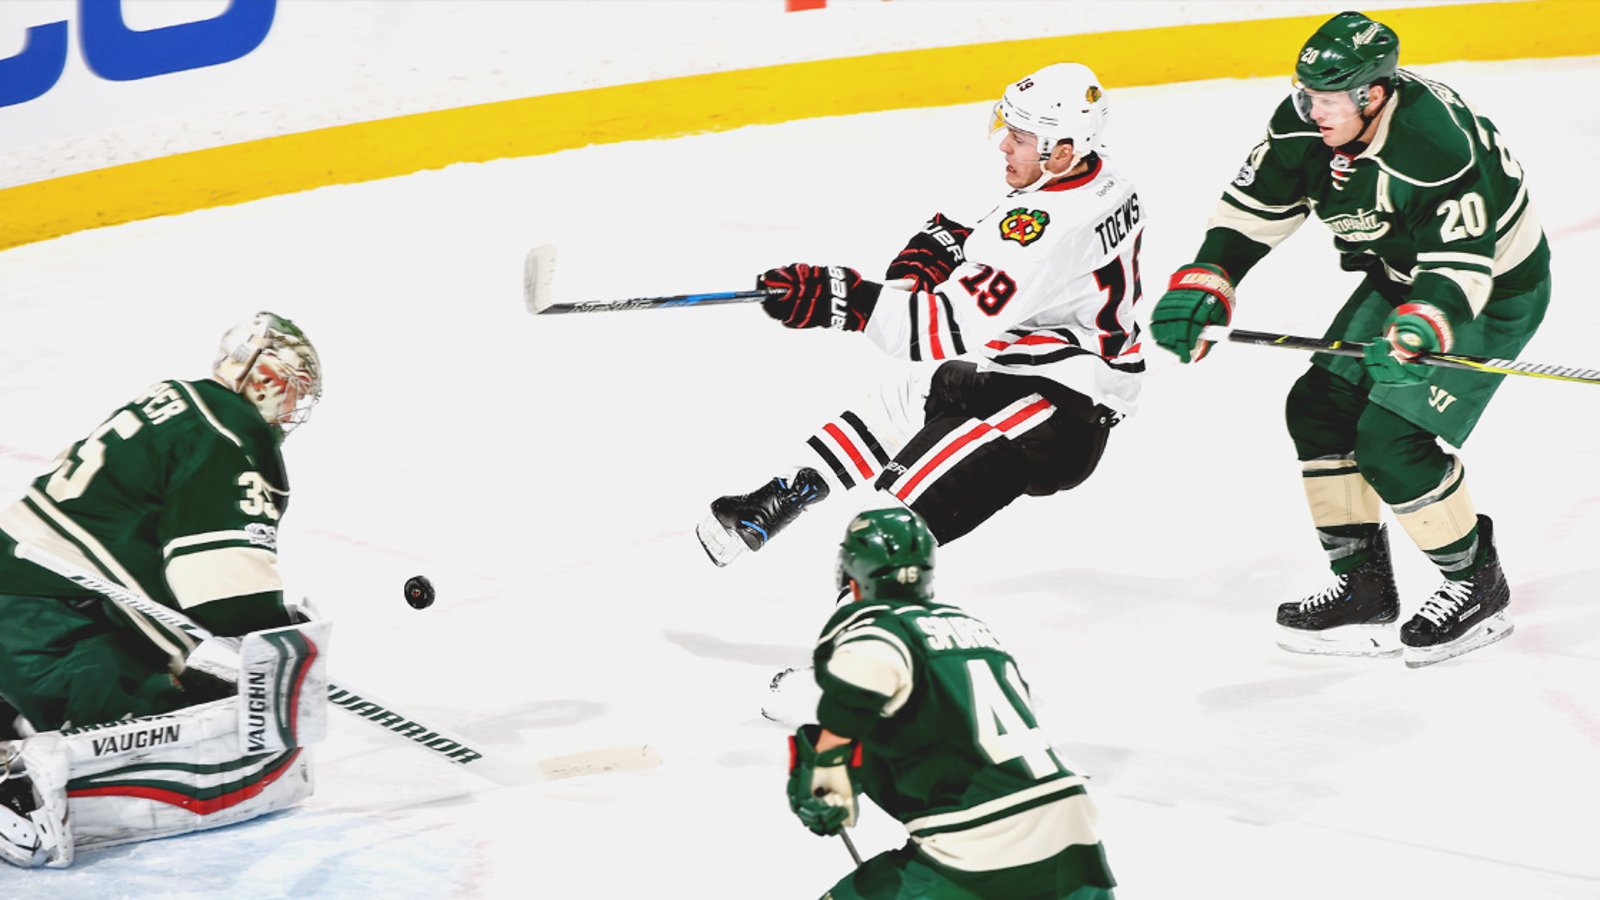 Must See : Epic battle between the Wild and the Blackhawks!